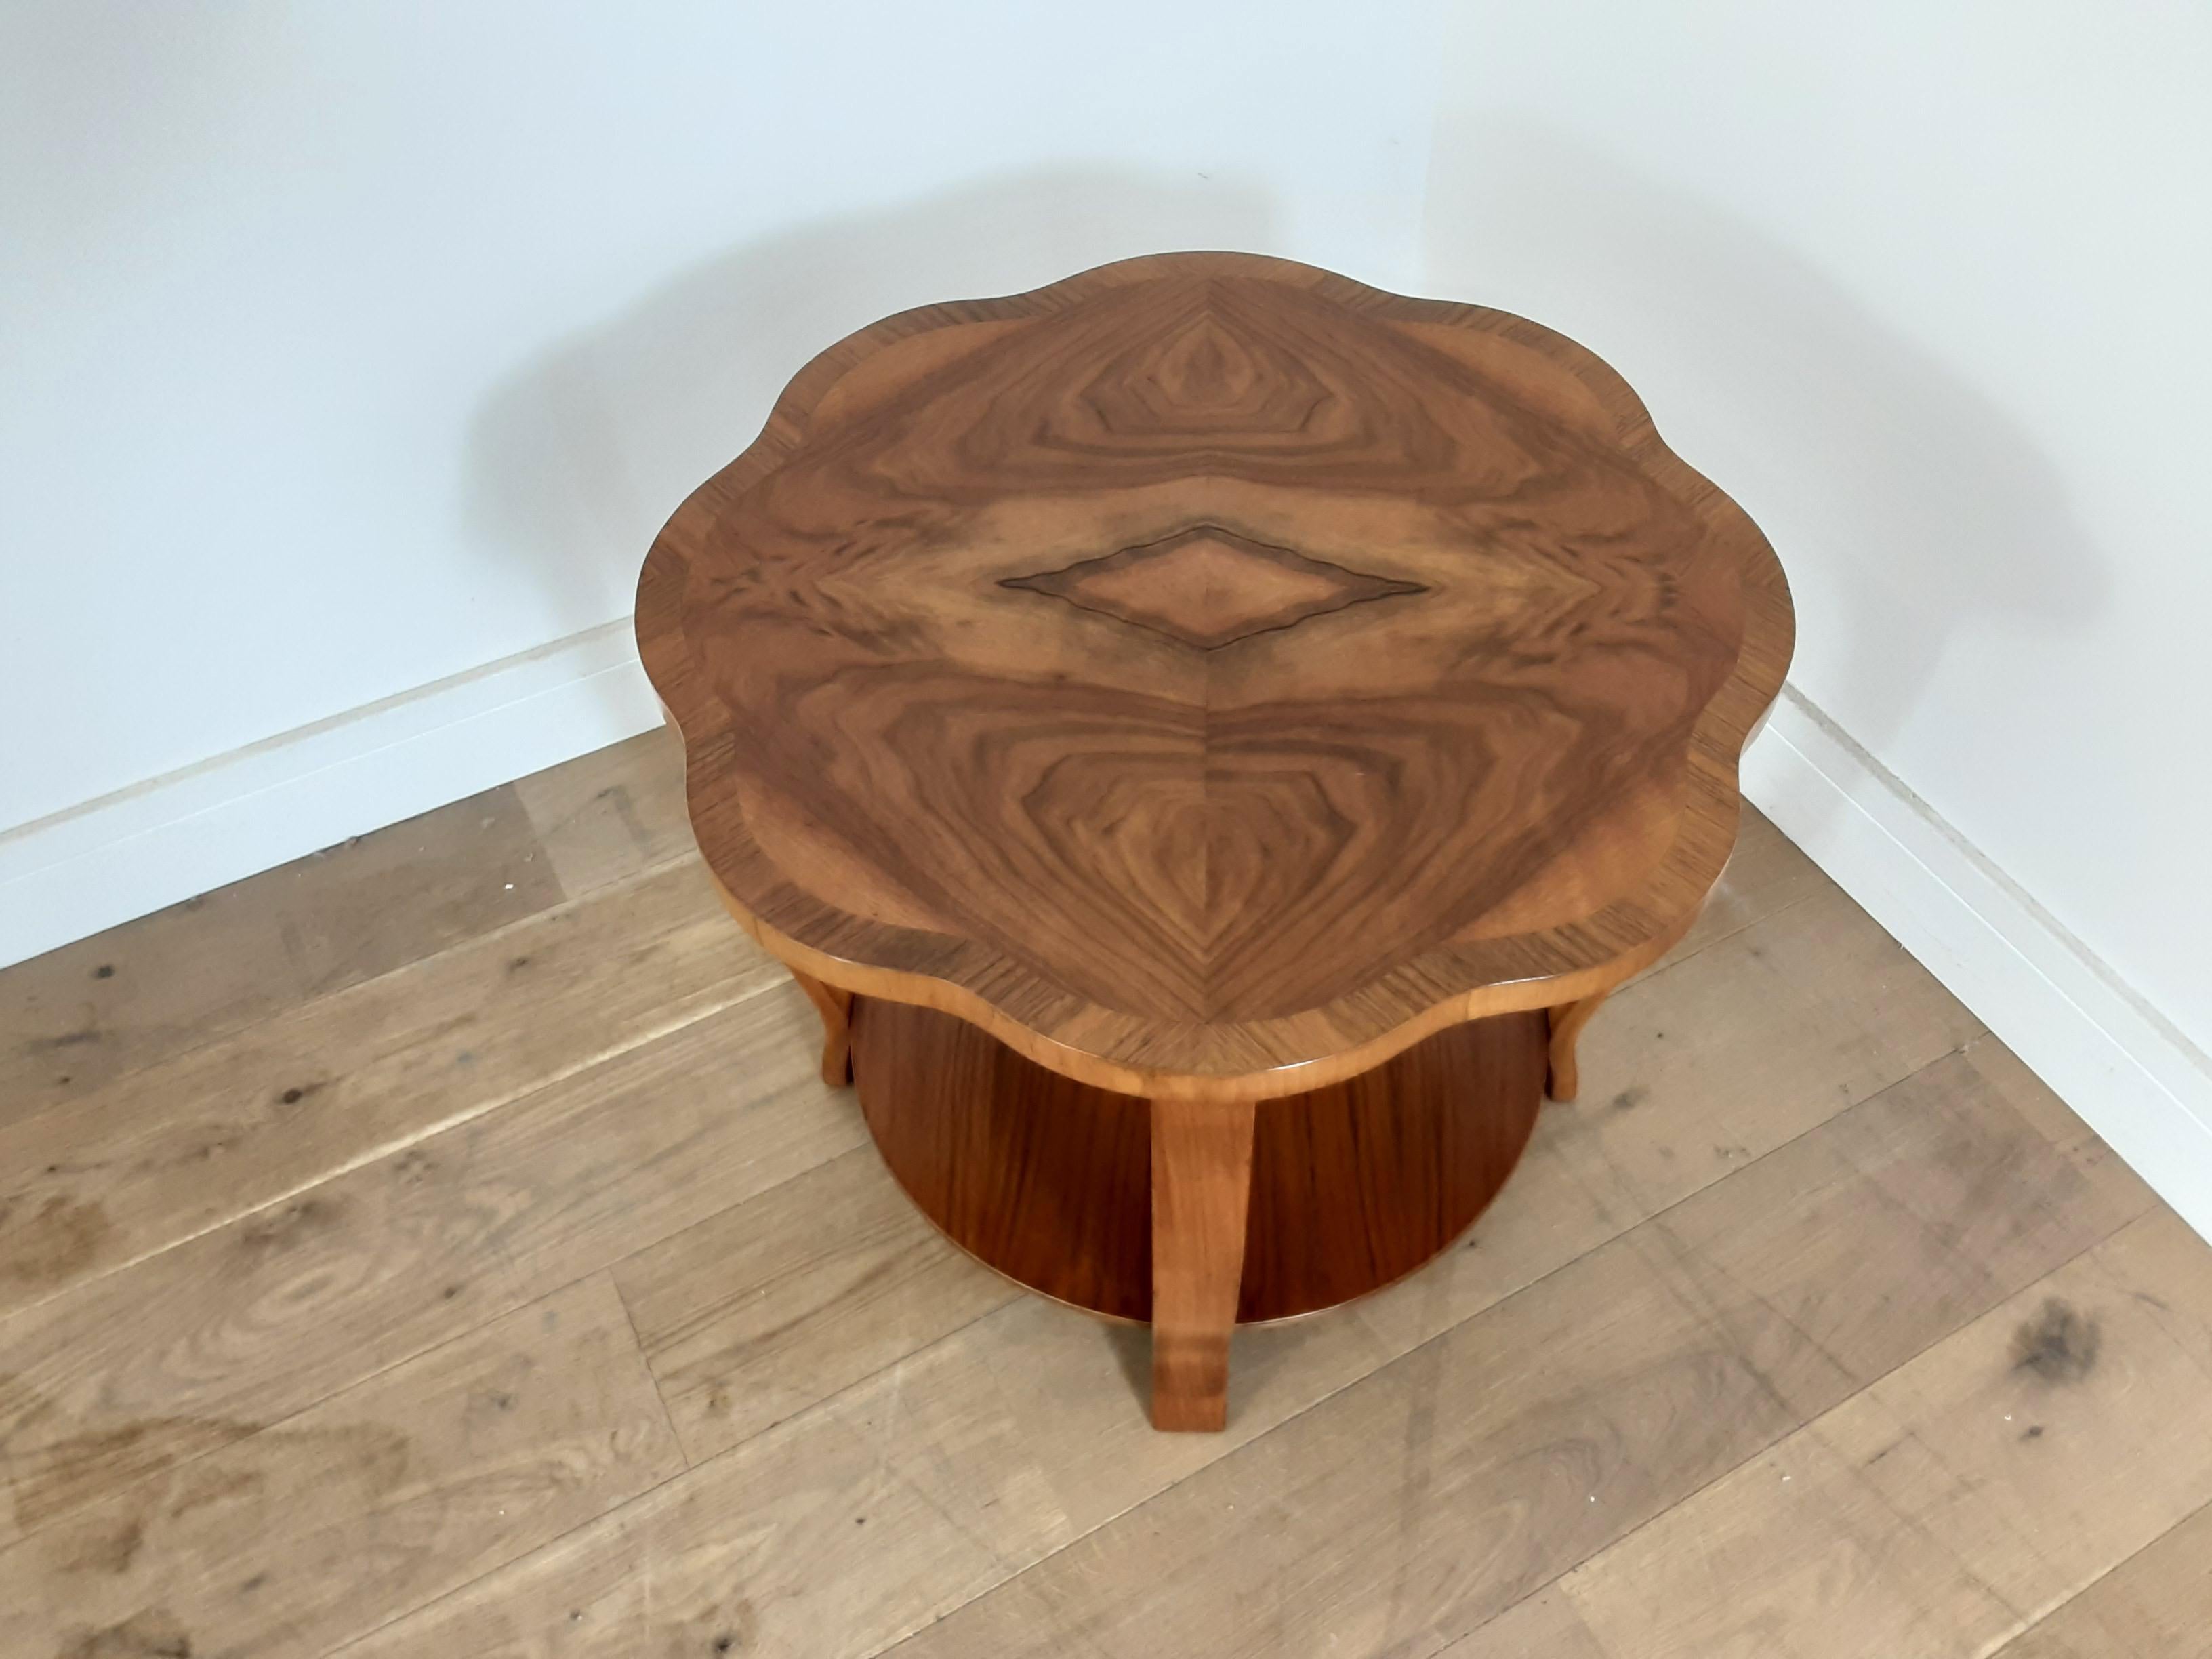 Art Deco figured walnut side table.
Art Deco two-tier table.
Beautiful scalloped top with butterfly veneer edged in a walnut band.
Size: 51 cm height, 62 cm diameter
British, circa 1930.